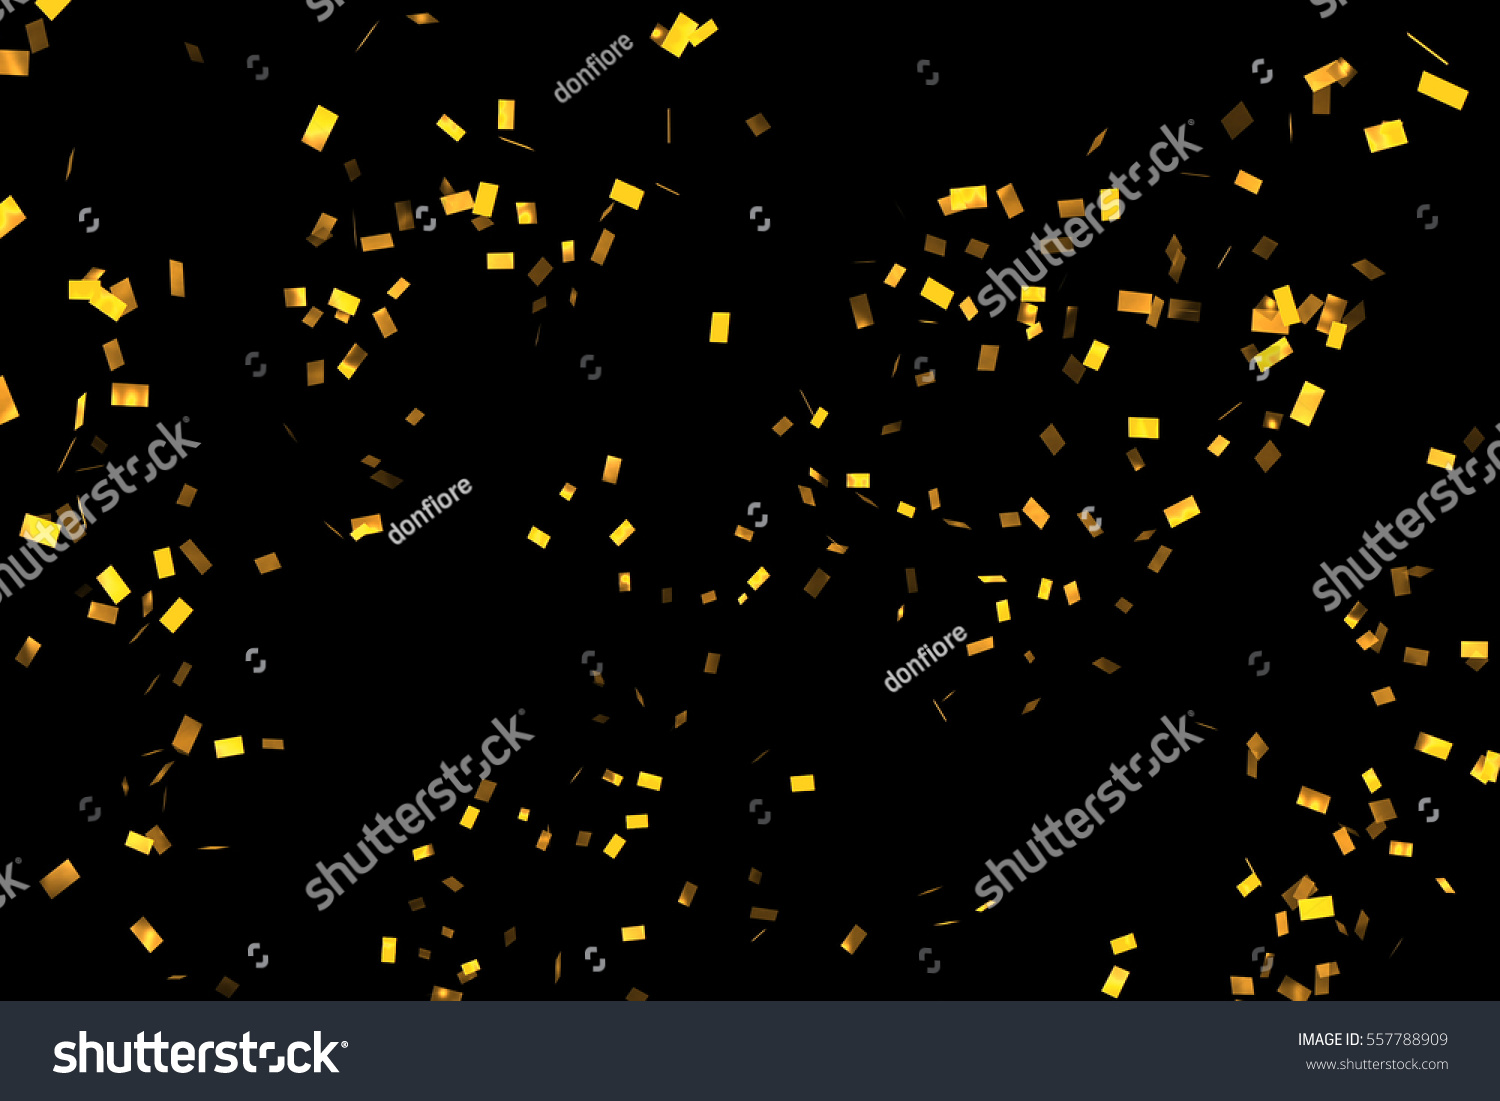 falling golden metallic glitter foil confetti, animation movement on black background, gold holiday and festive fun concept #557788909